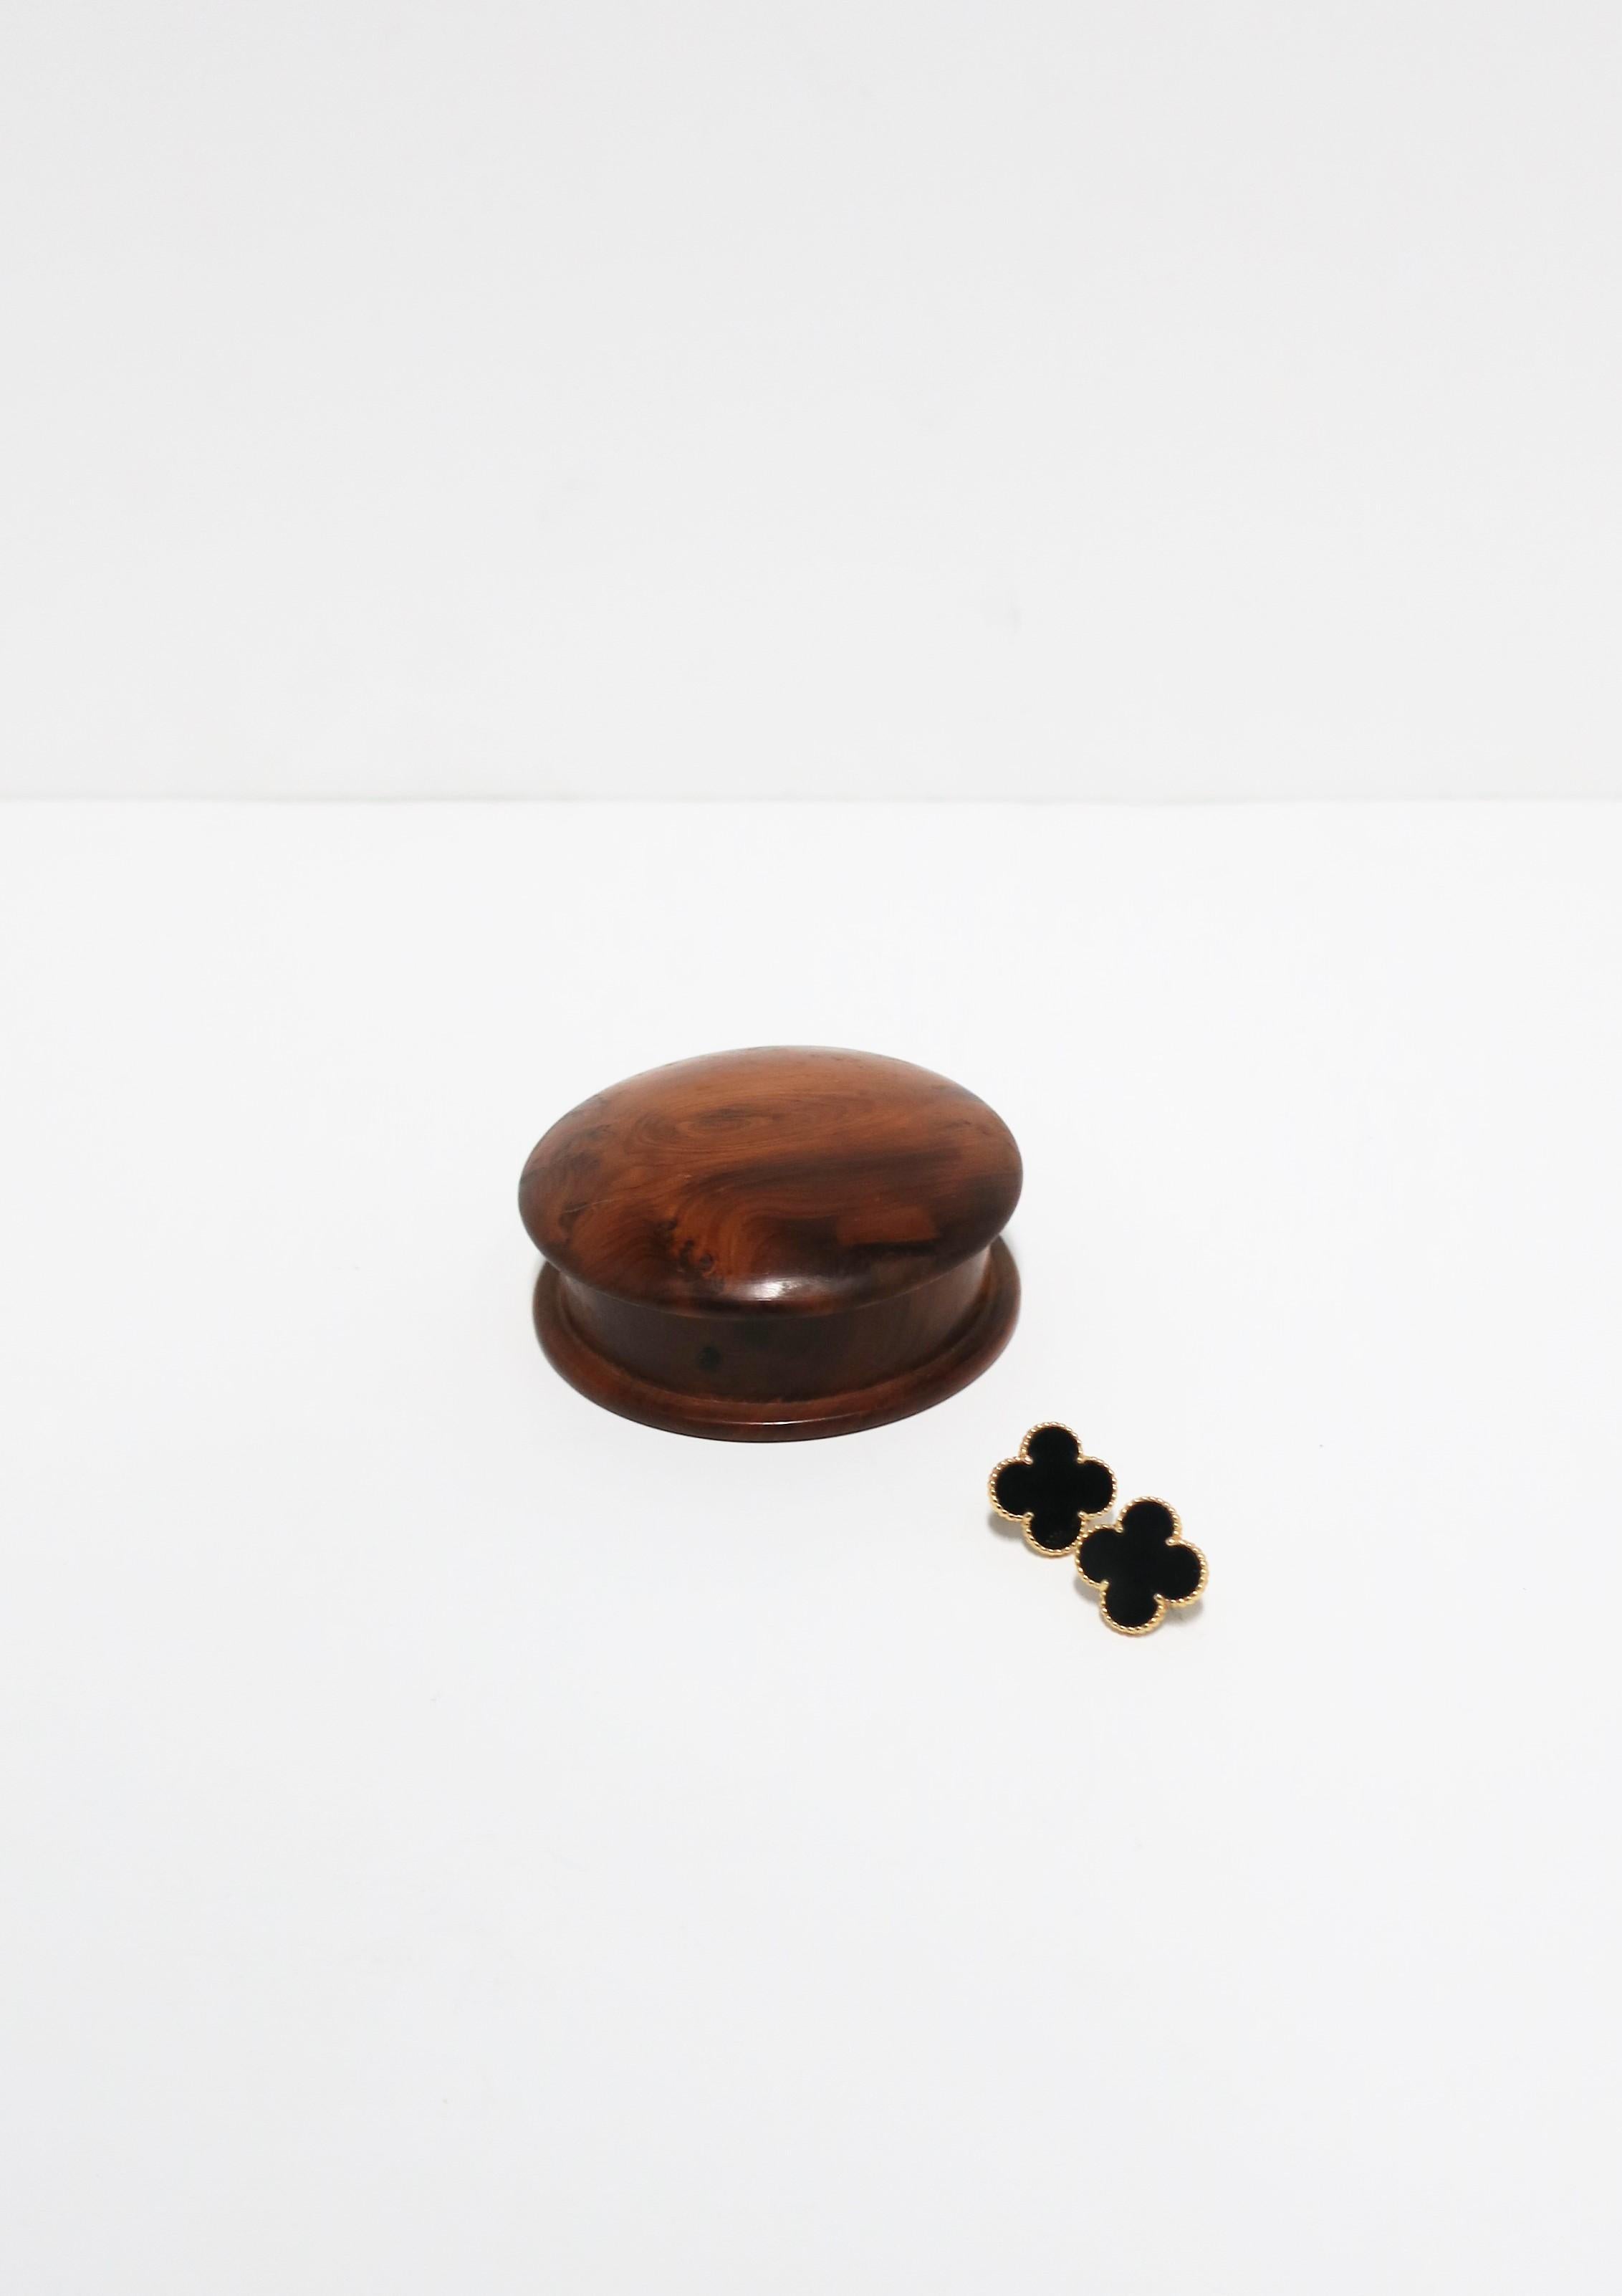 Hand-Crafted Burl Wood Jewelry Box For Sale